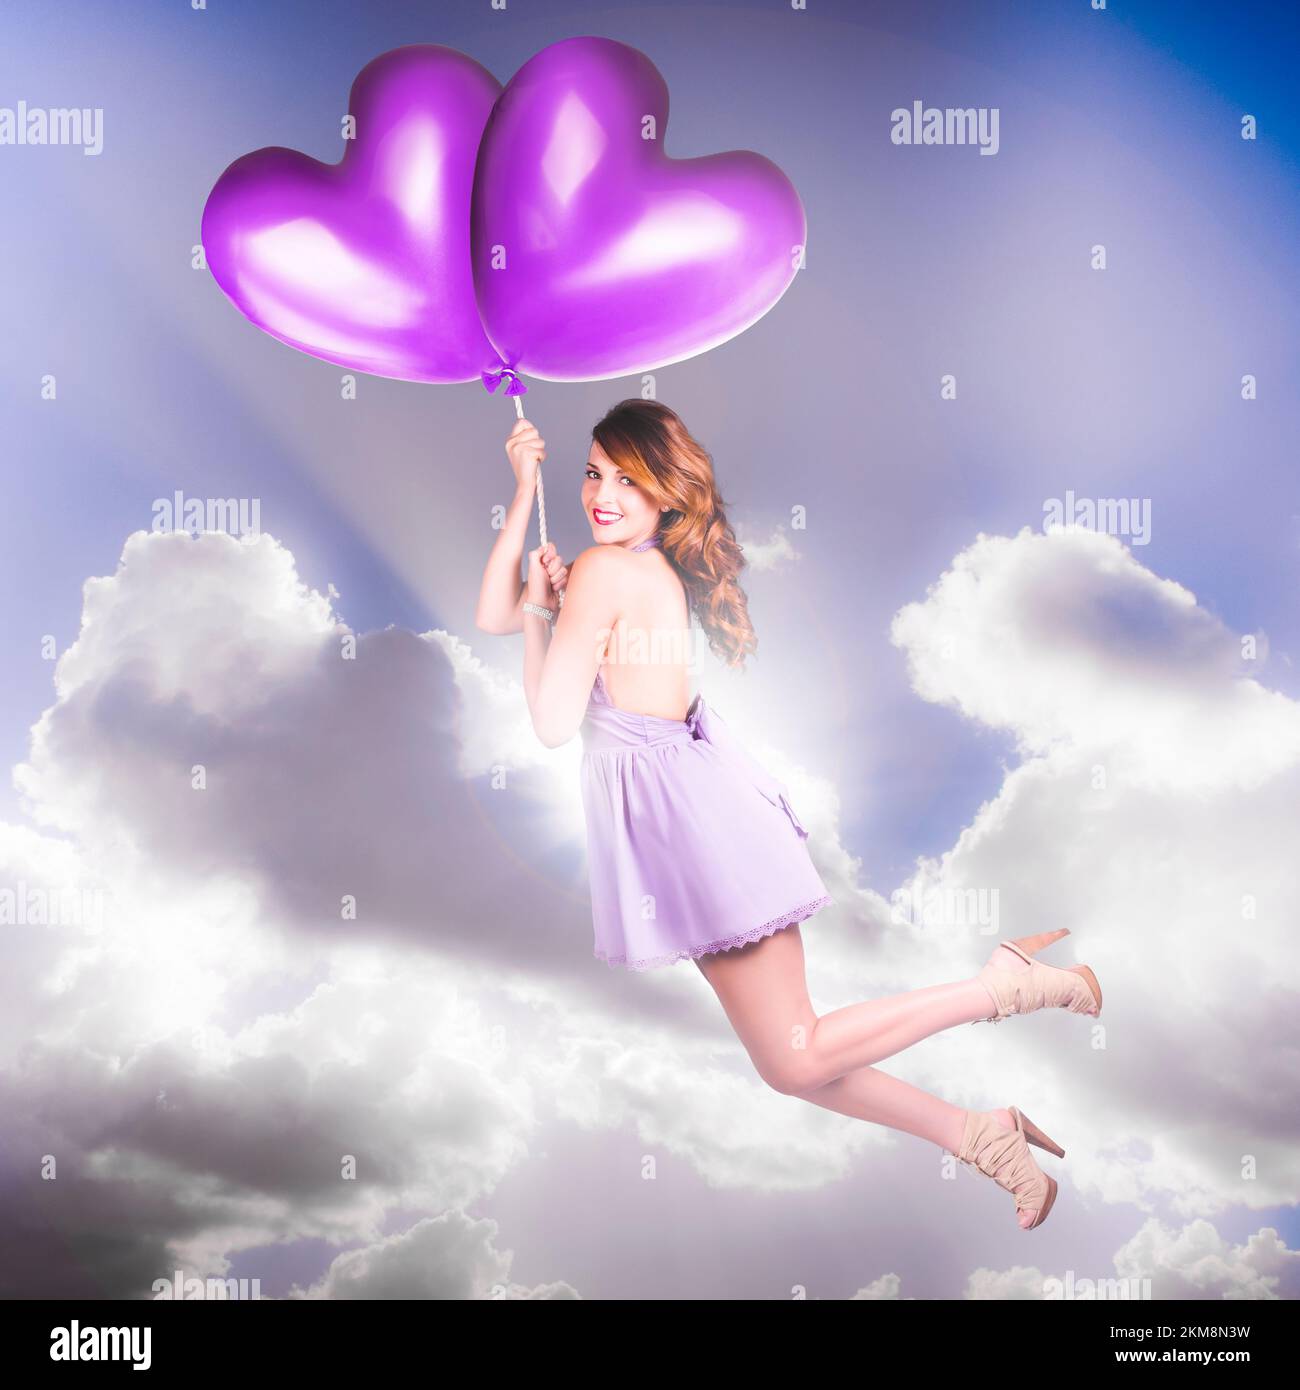 A scene of velvet romances with love struck pinup girl taken to air bound bliss with ballooning hearts Stock Photo